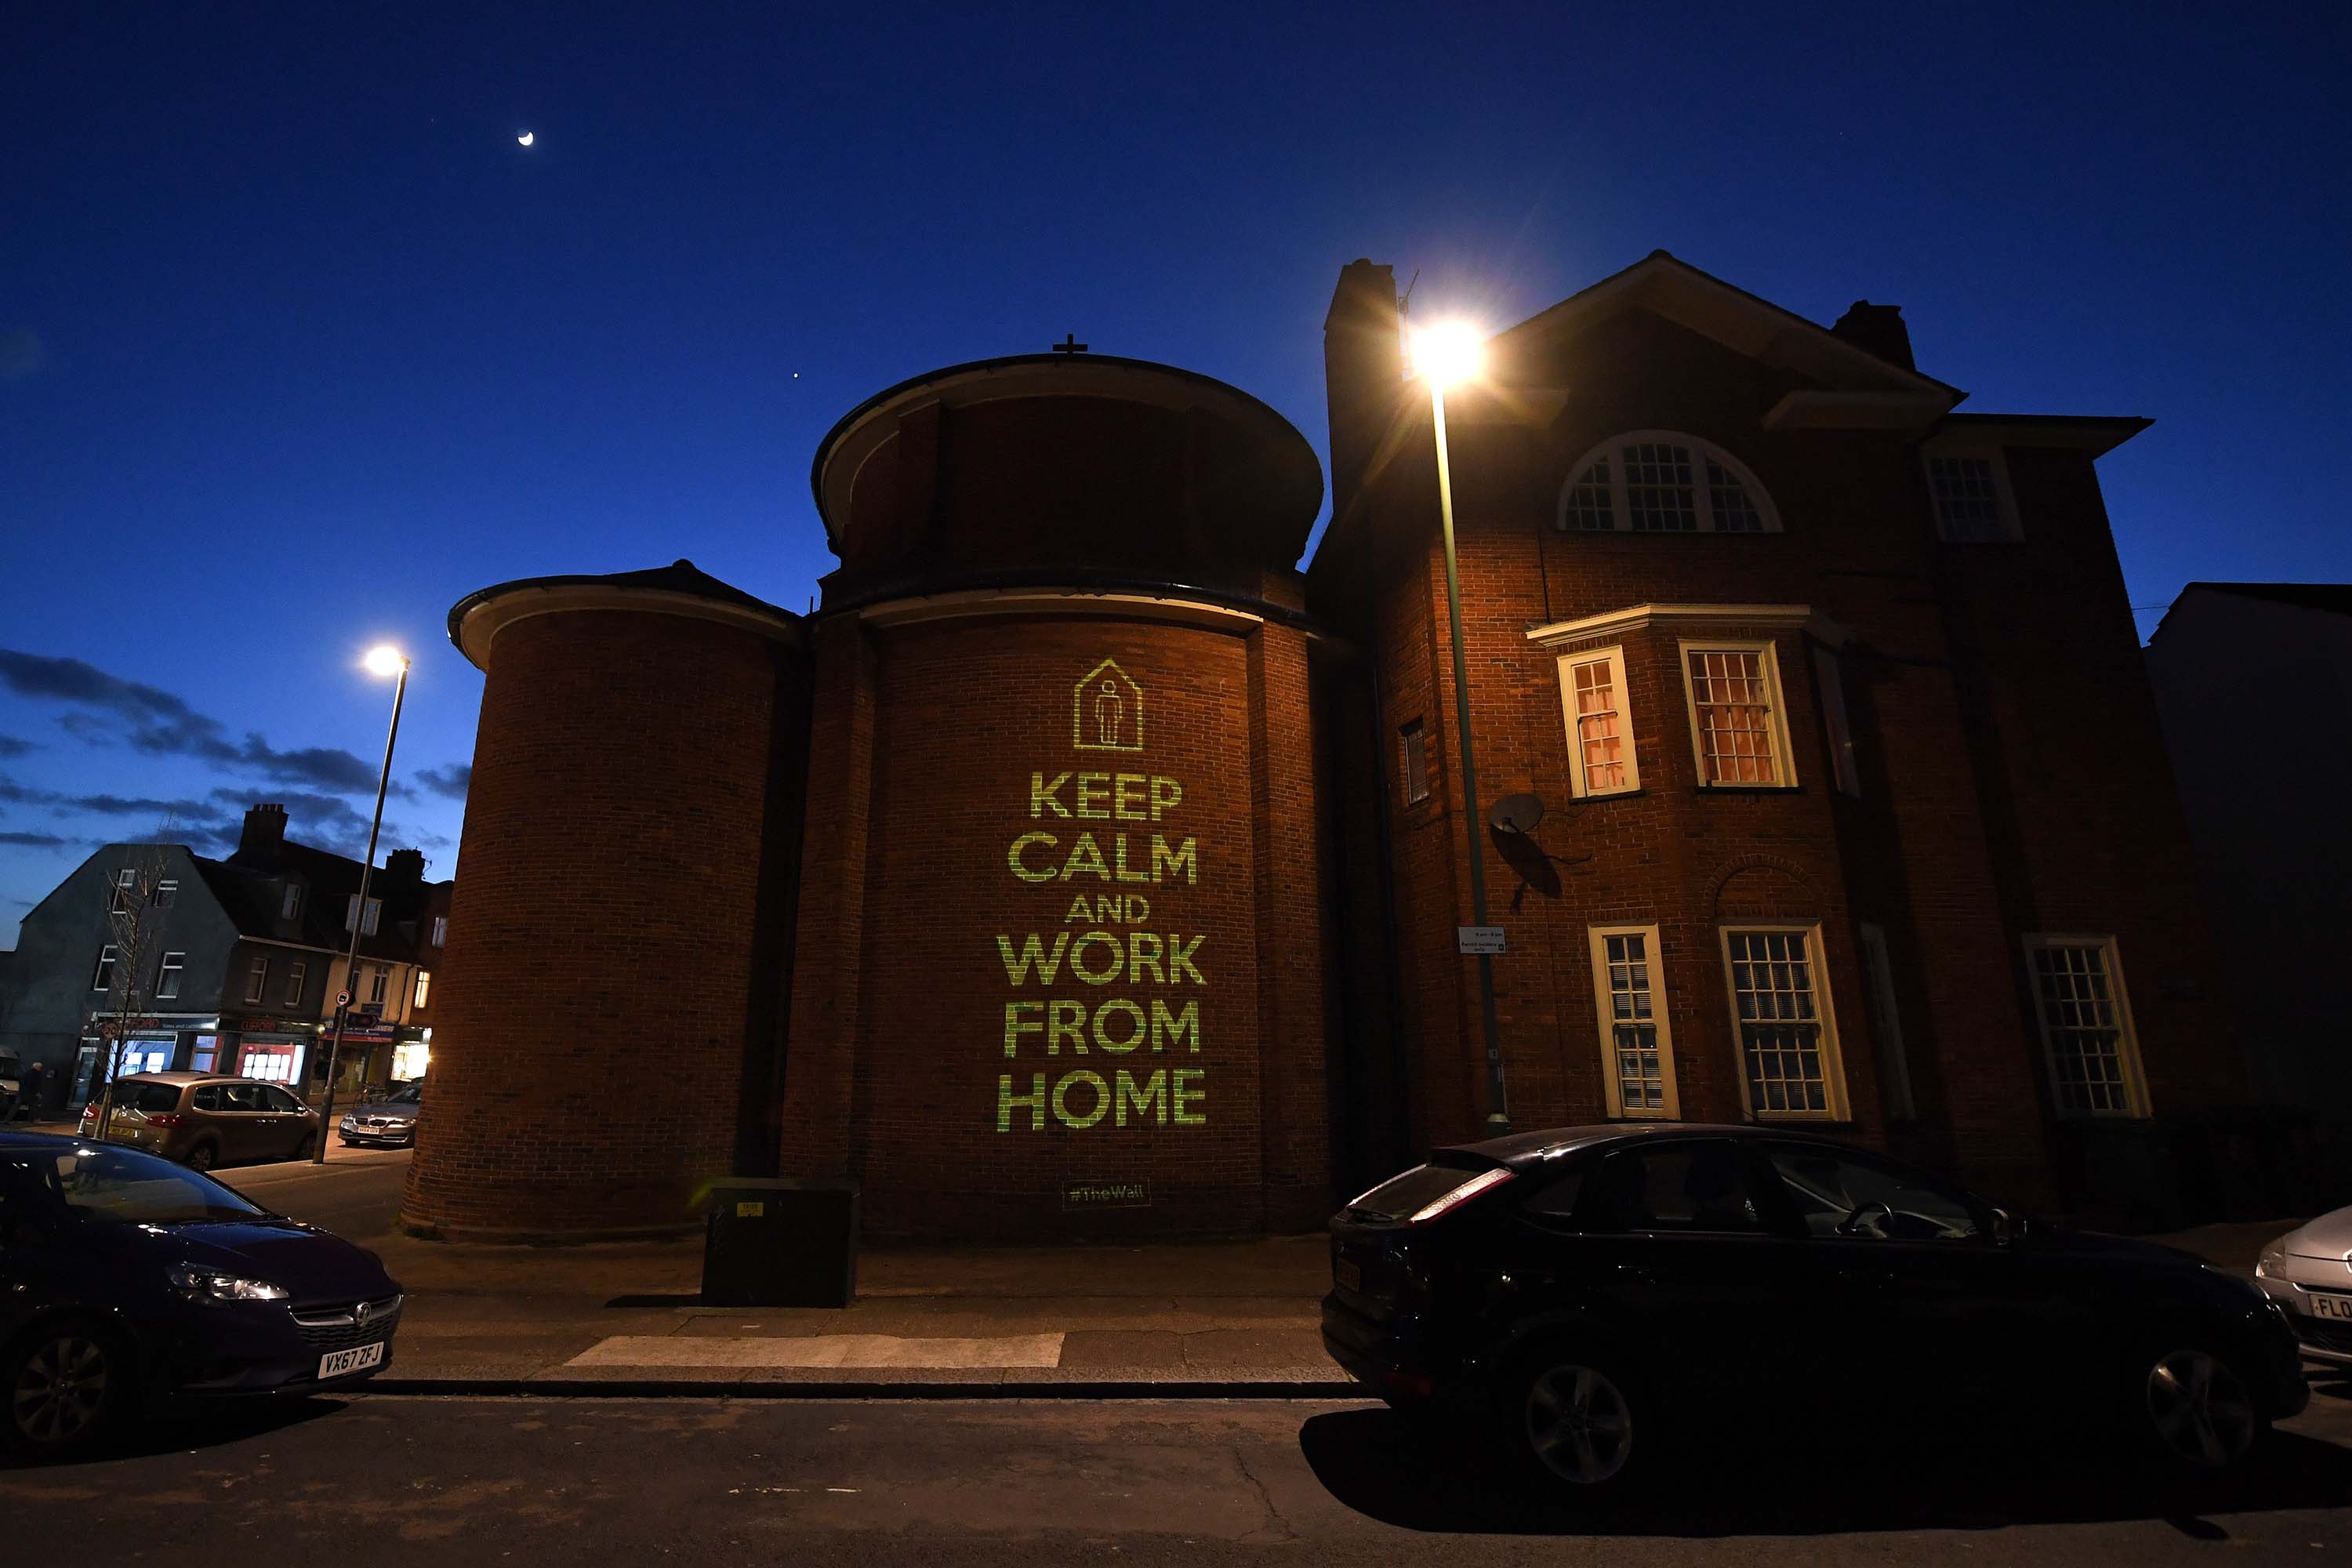 A message of 'Keep Calm And Work From Home' by artist Mike Dicks is projected onto a wall of a church in Brighton & Hove, England, on March 29.